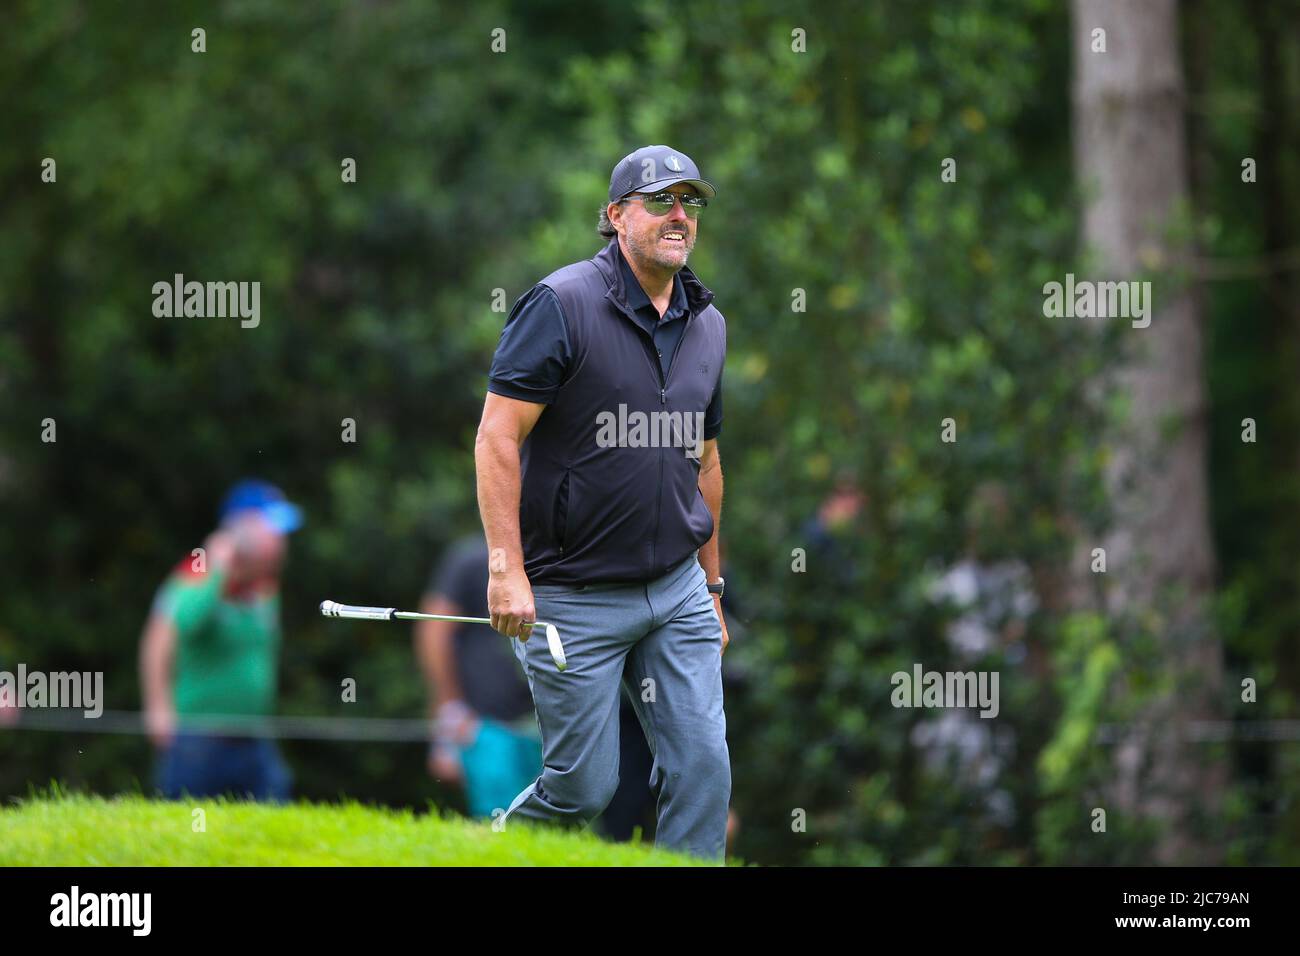 ST ALBANS, ENGLAND - JUNE 09: Phil Mickelson of the United States walks down the 3rd hole during day one of the LIV Golf Invitational at The Centurion Club on June 9, 2022 in St Albans, England. (MB Media) Stock Photo